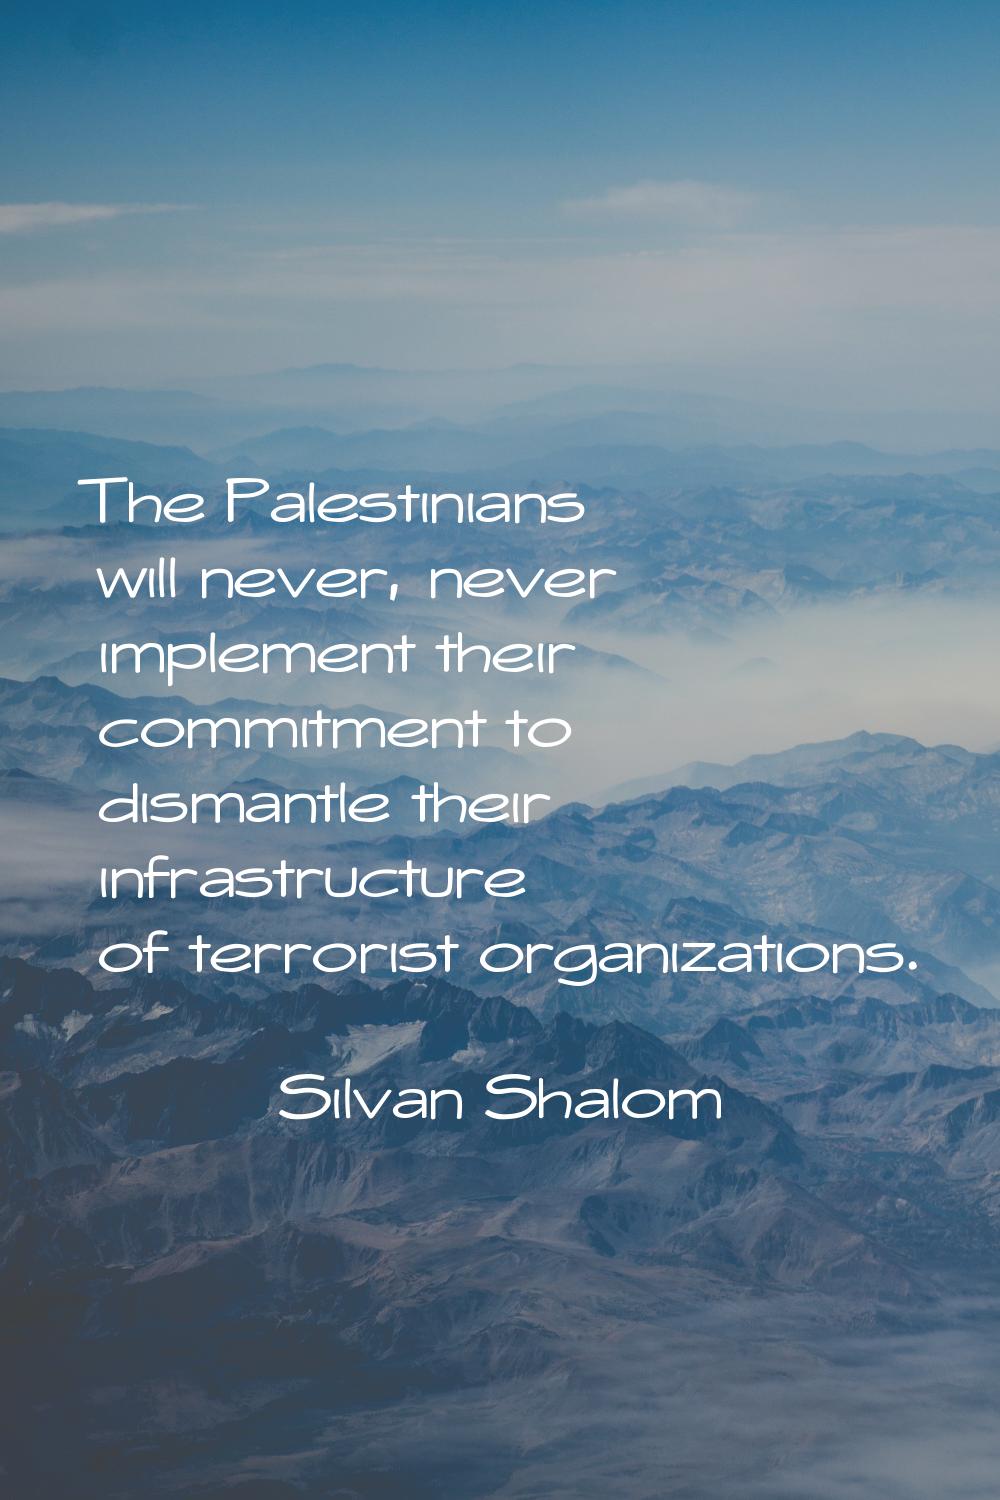 The Palestinians will never, never implement their commitment to dismantle their infrastructure of 